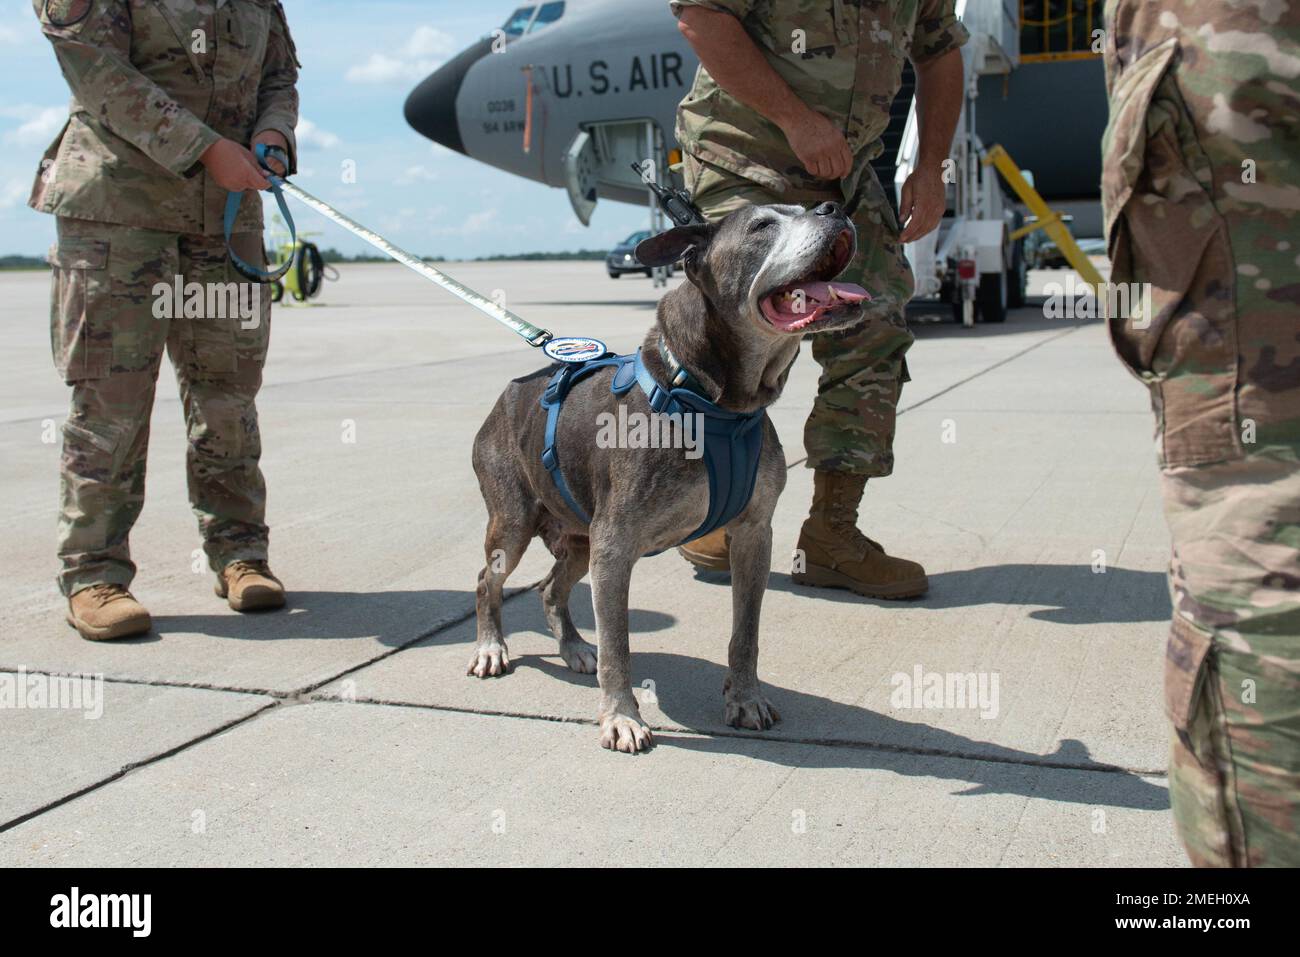 Niagara county local celebrity, Lloyd the dog, stands on the apron of a runway for the KC-135 Stratotanker accompanied by Airmen from the Niagara Falls Air Reserve Station, New York, on Wednesday, Aug. 17, 2022. The 107th Attack Wing, Air National Guard, invited Lloyd to enjoy the day with Airmen as he battles the late stages of kidney failure. Stock Photo